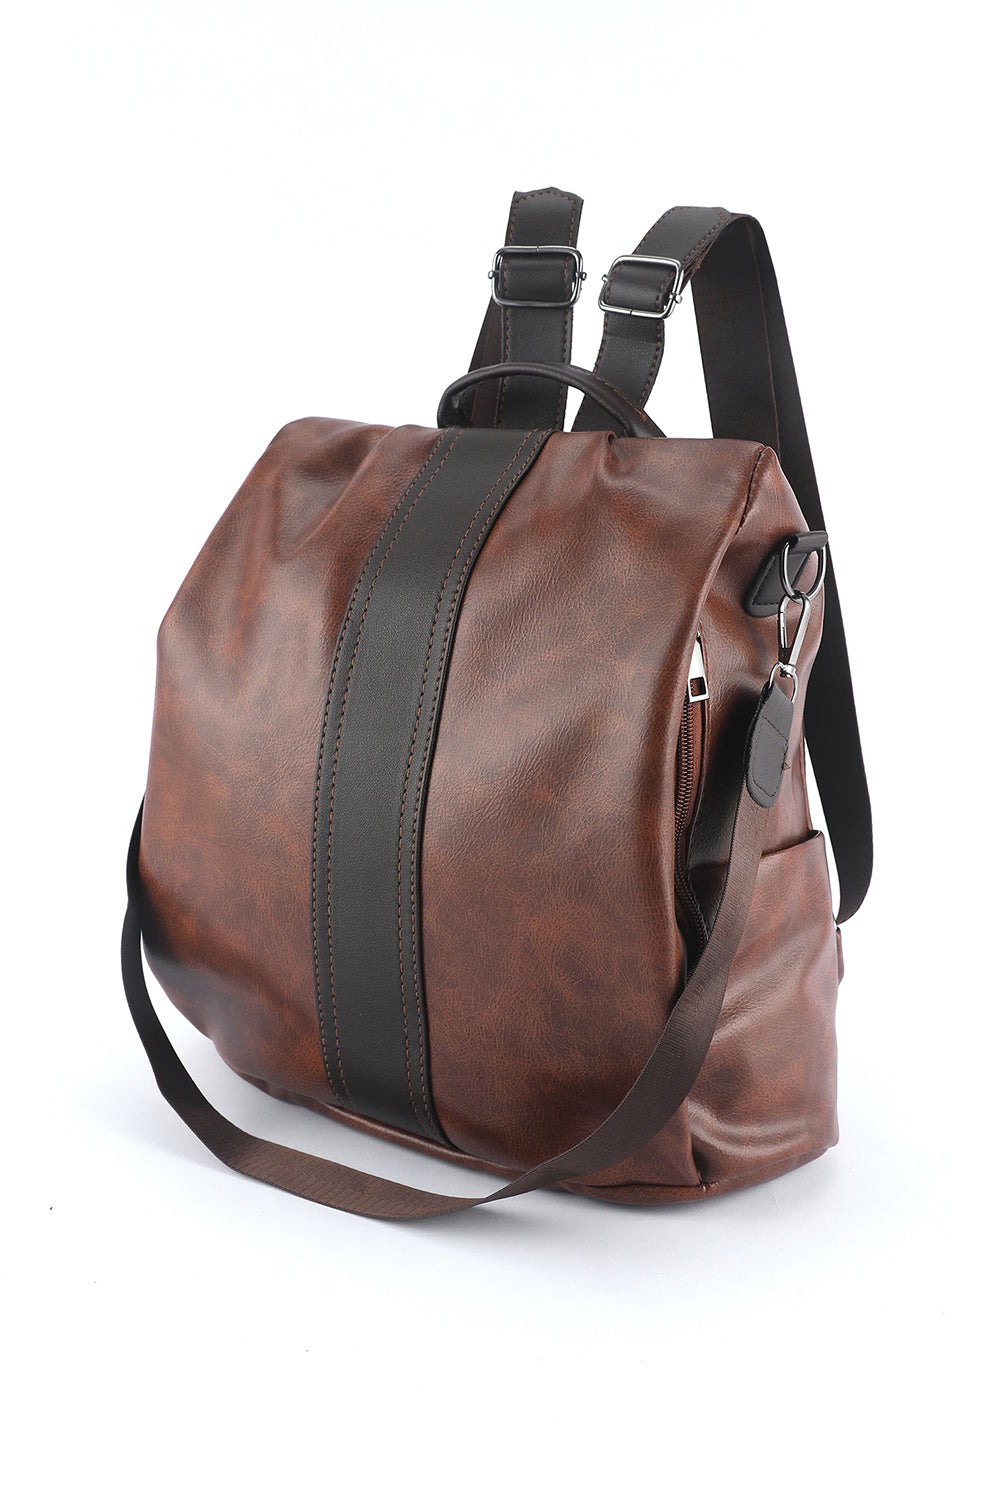 Cali Chic Brown Multifunctional Retro Faux Leather Backpack